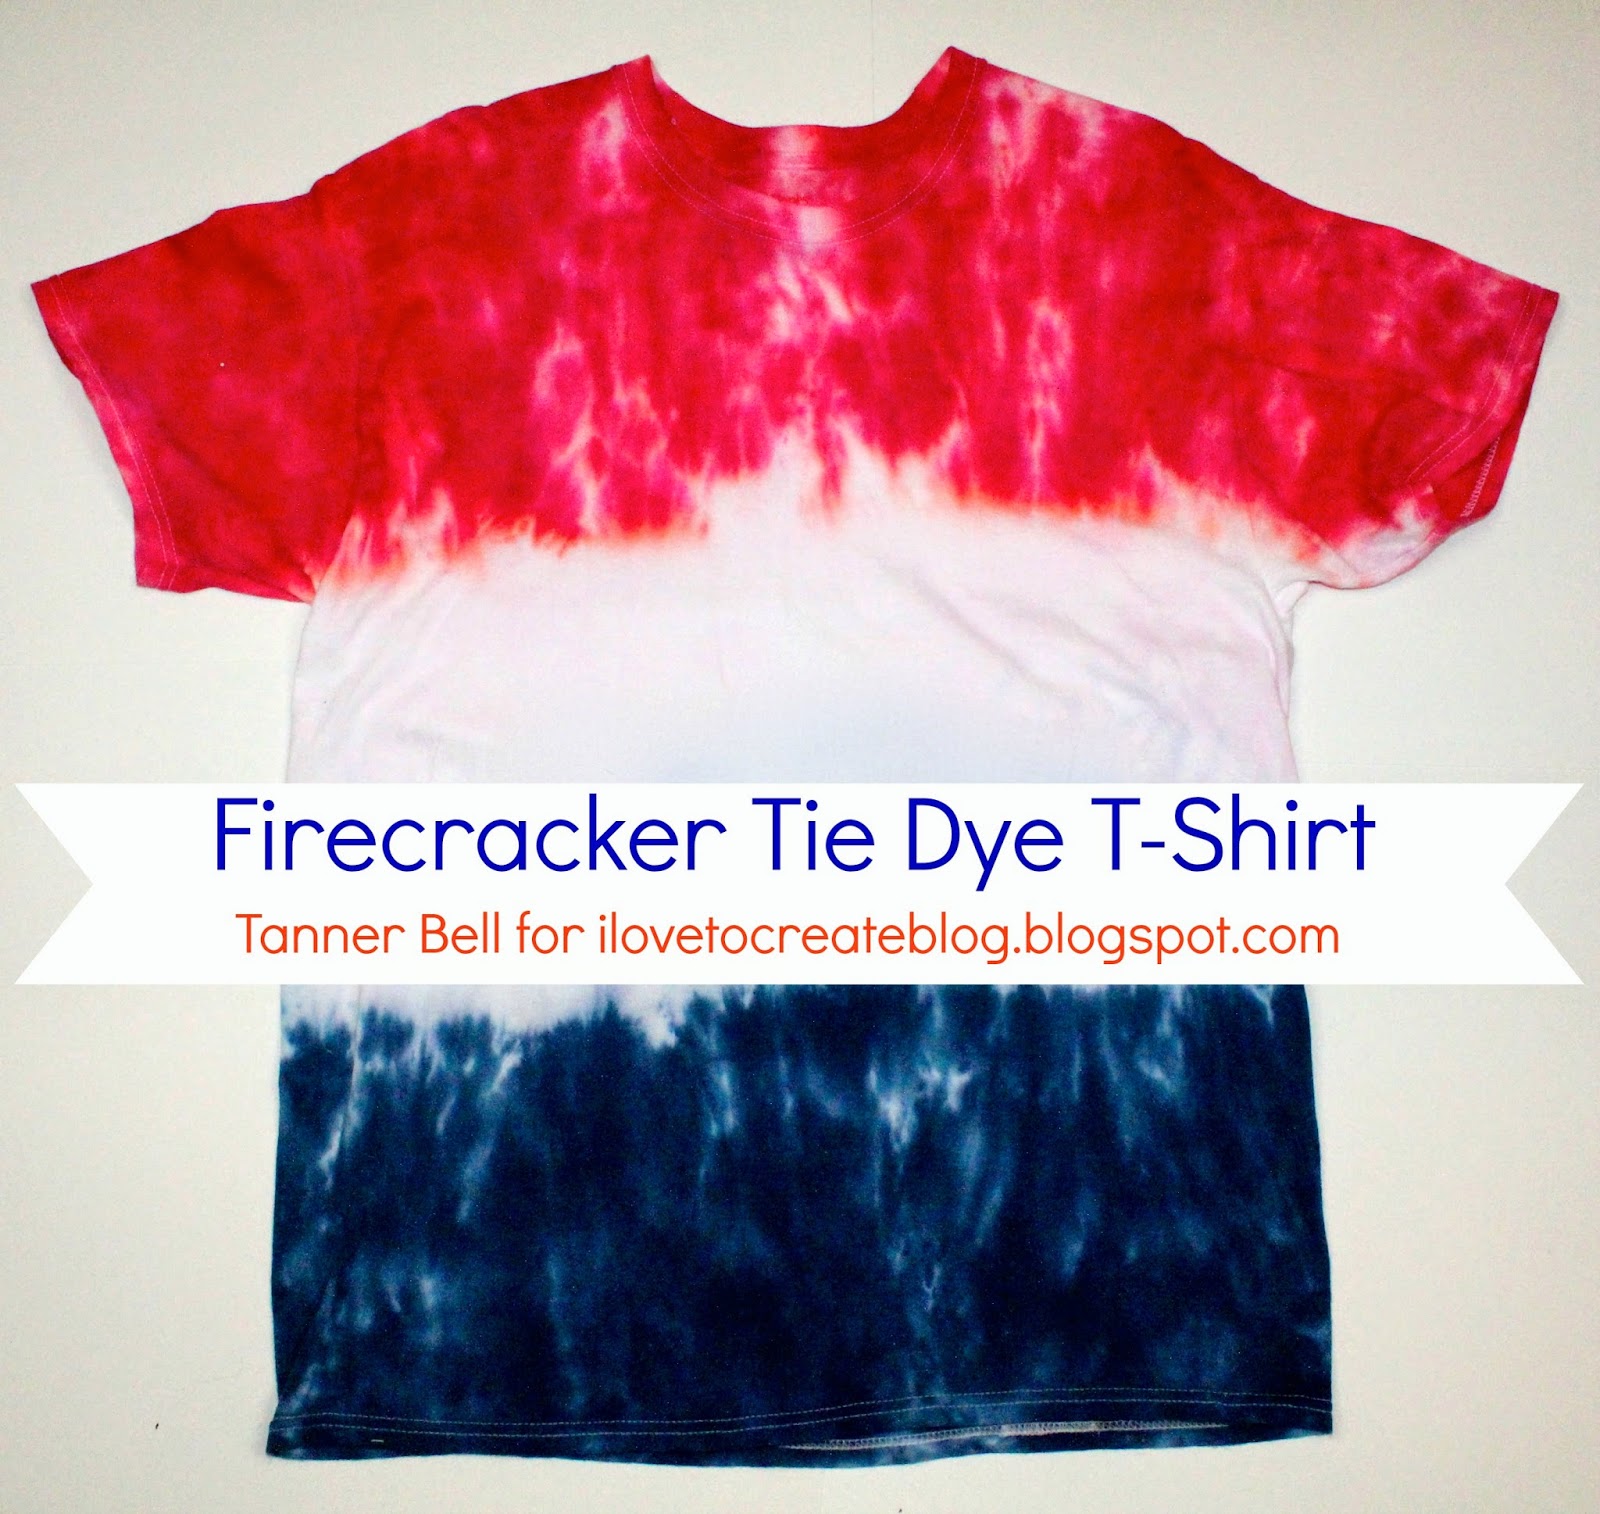 Firecracker tie dye shirt perfect to make during camping